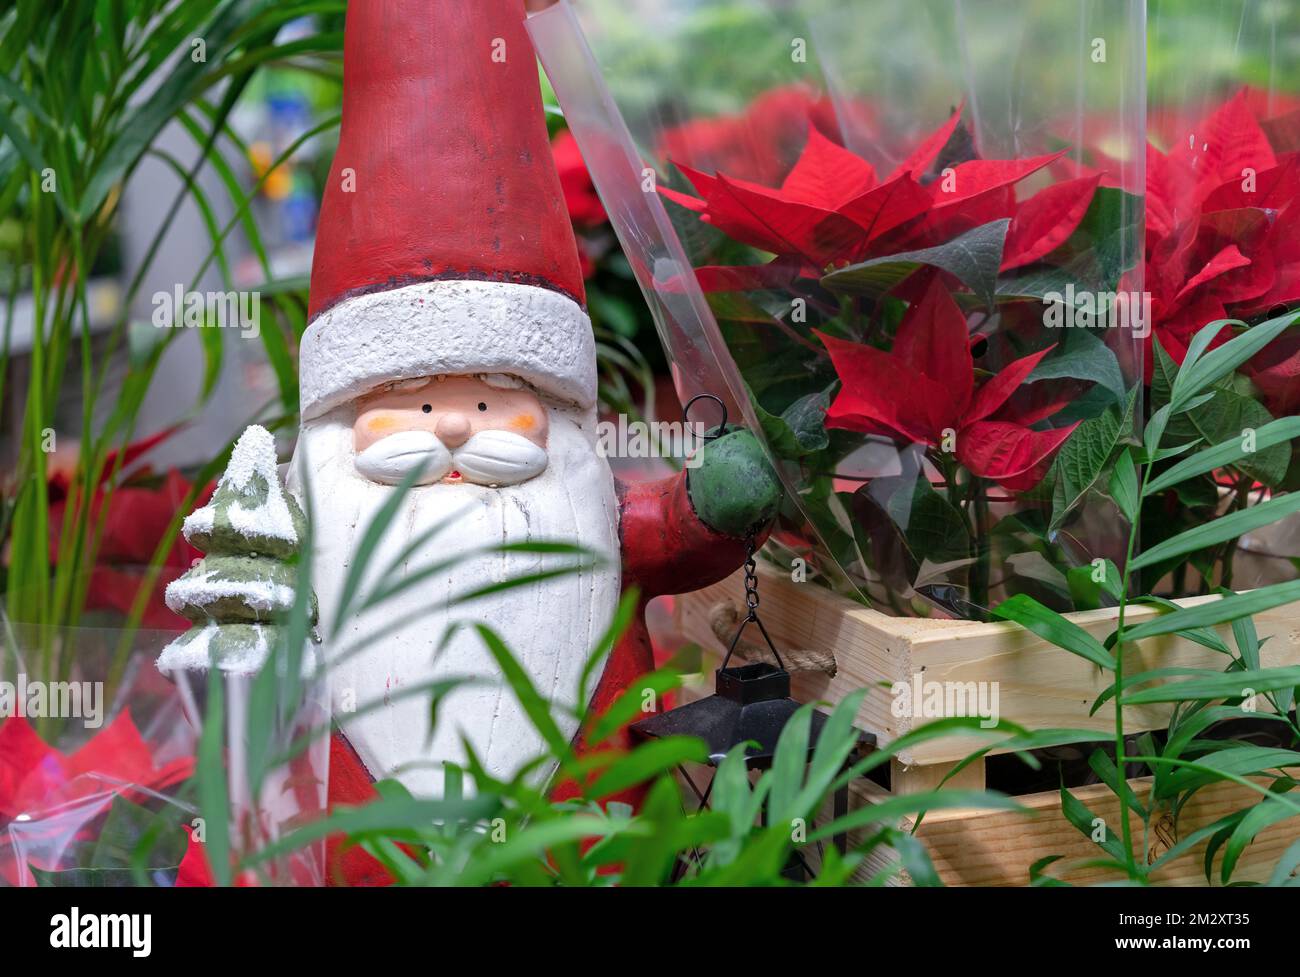 Figurine of Santa Claus with a lantern among red poinsettia flowers. Stock Photo